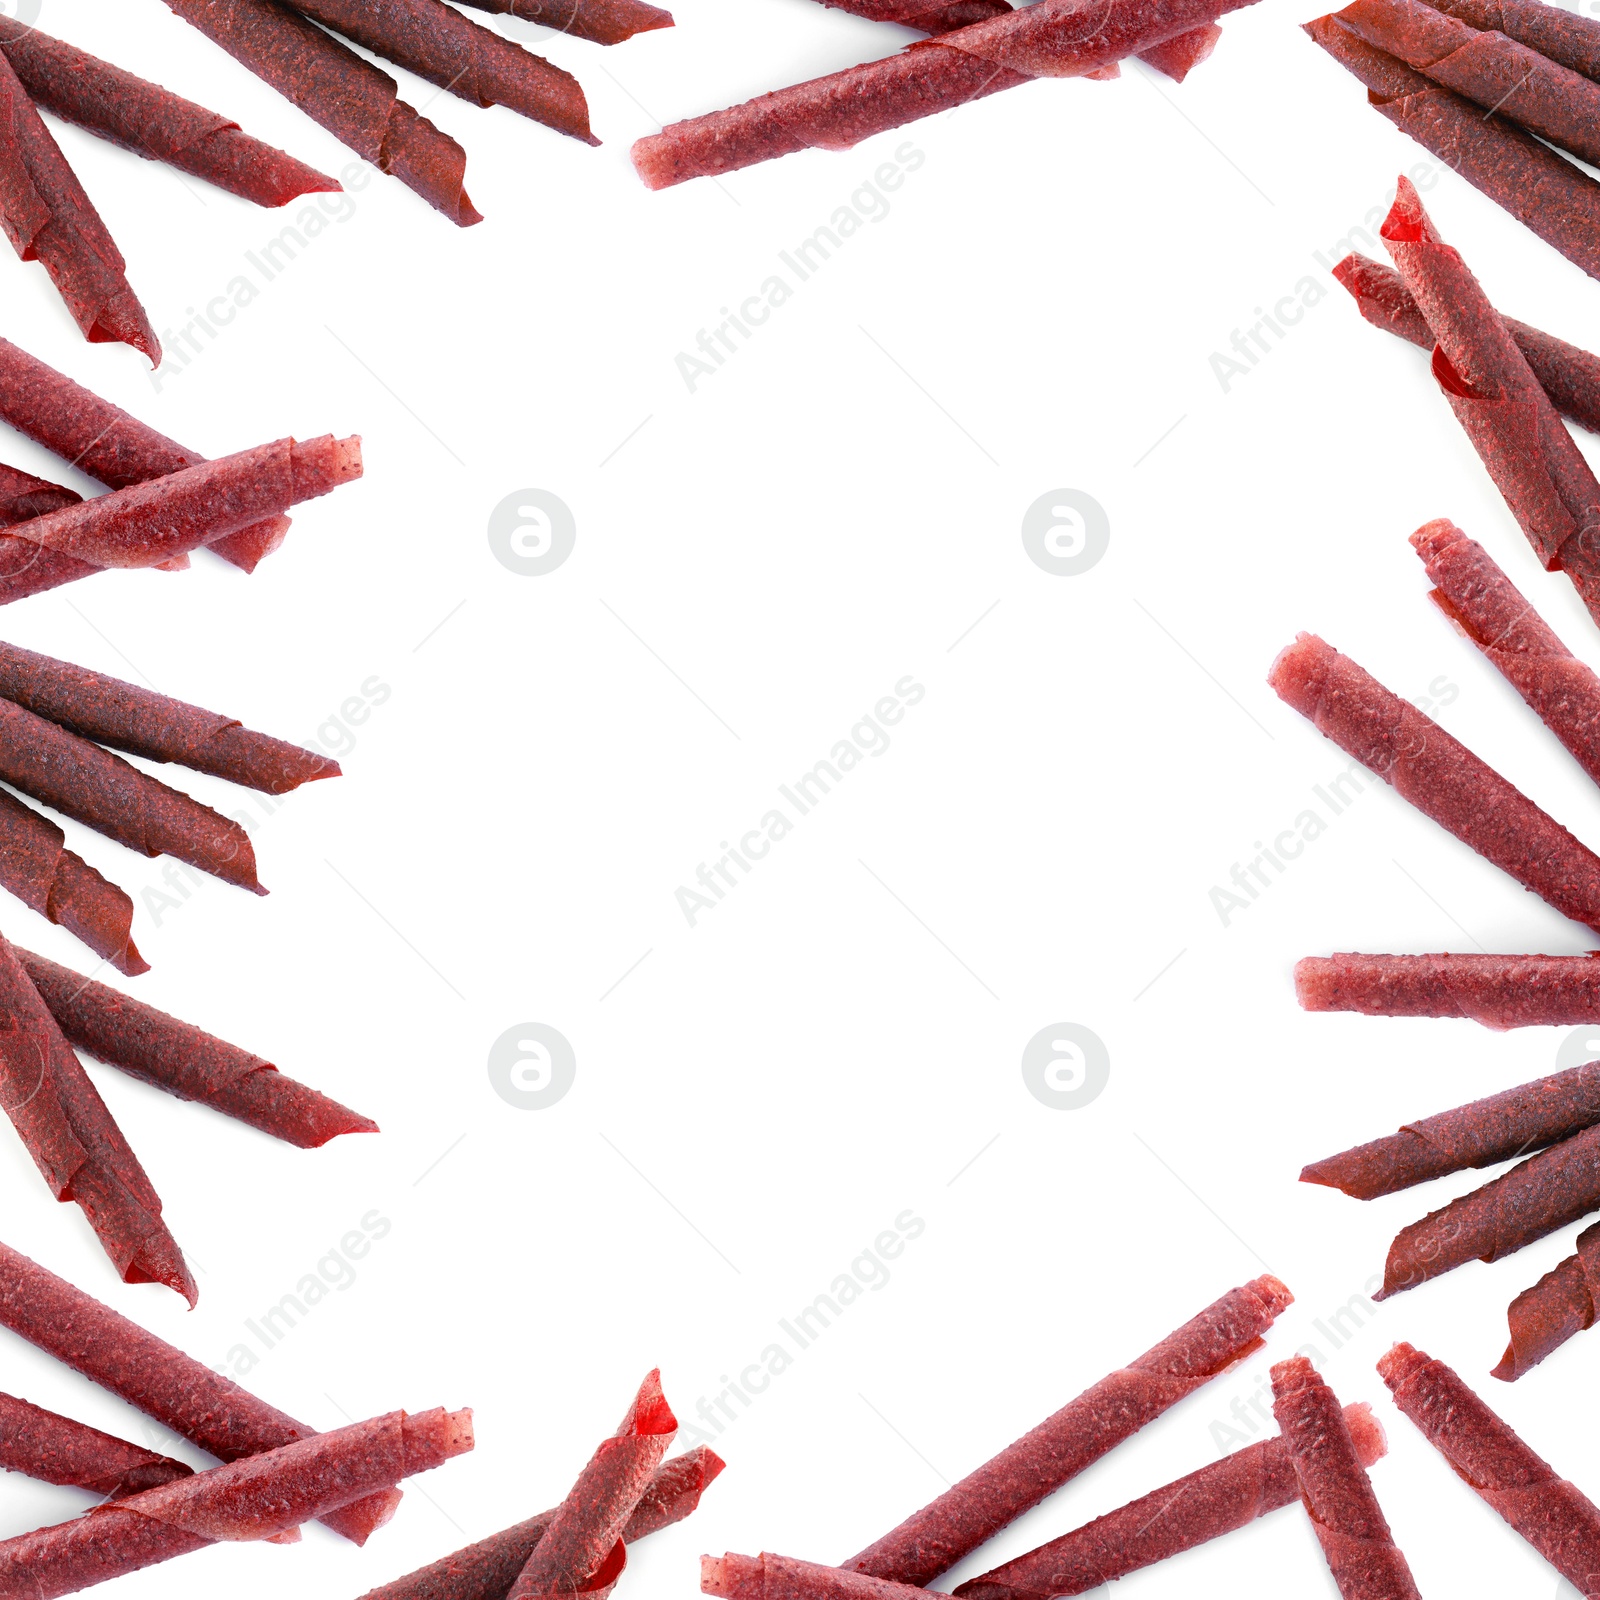 Image of Frame made of delicious fruit leather rolls on white background